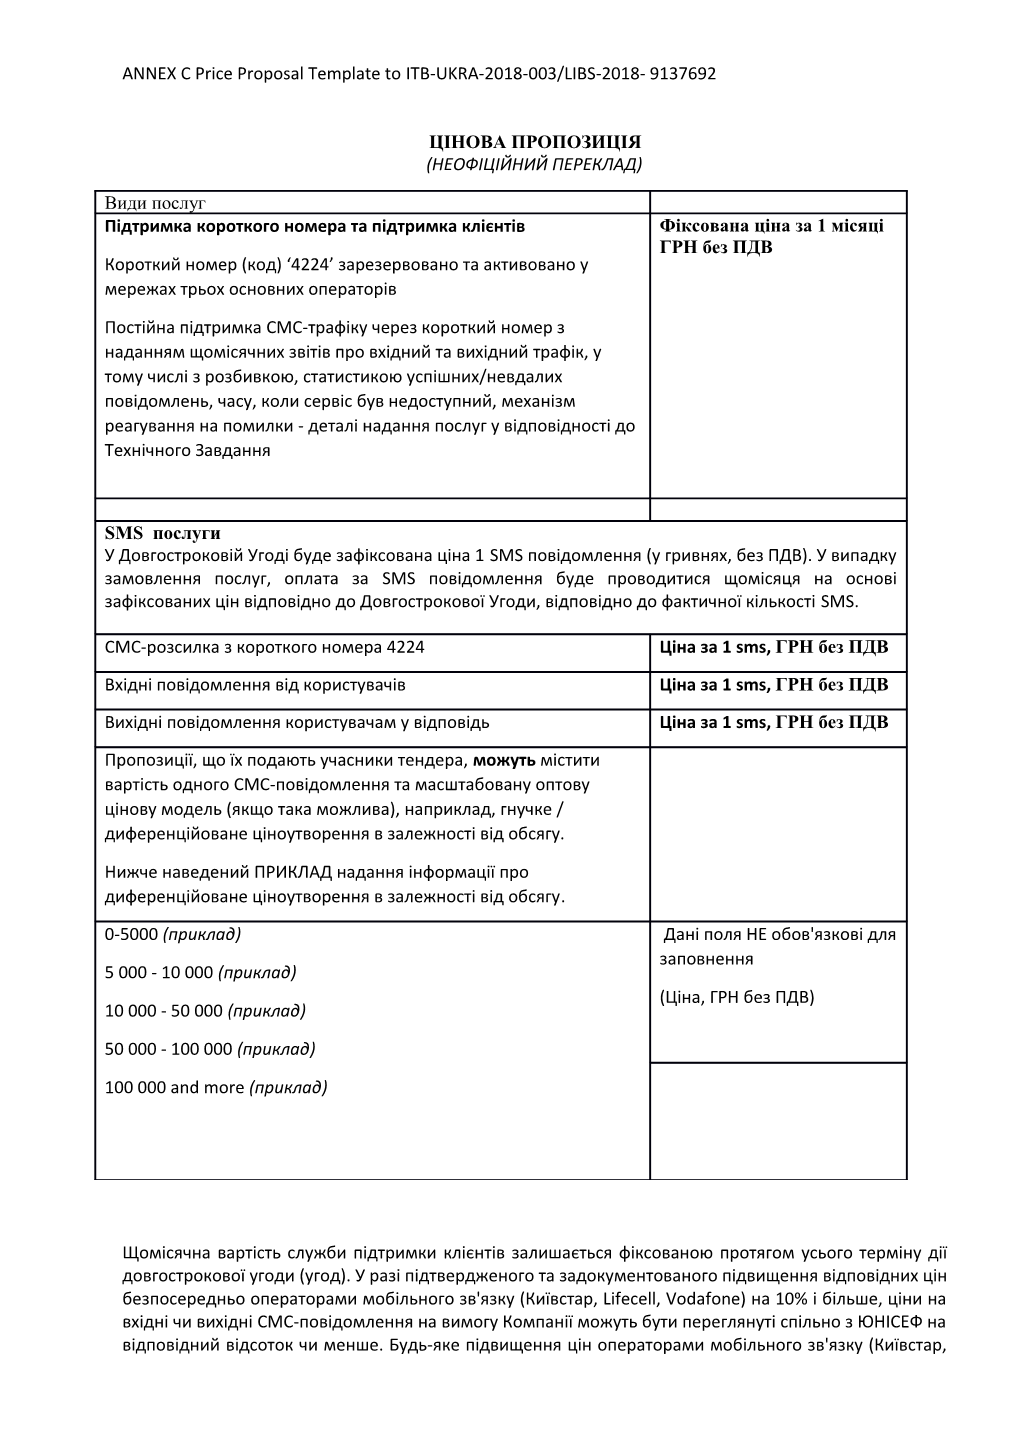 ANNEX Cprice Proposal Template to ITB-UKRA-2018-003/LIBS-2018- 9137692